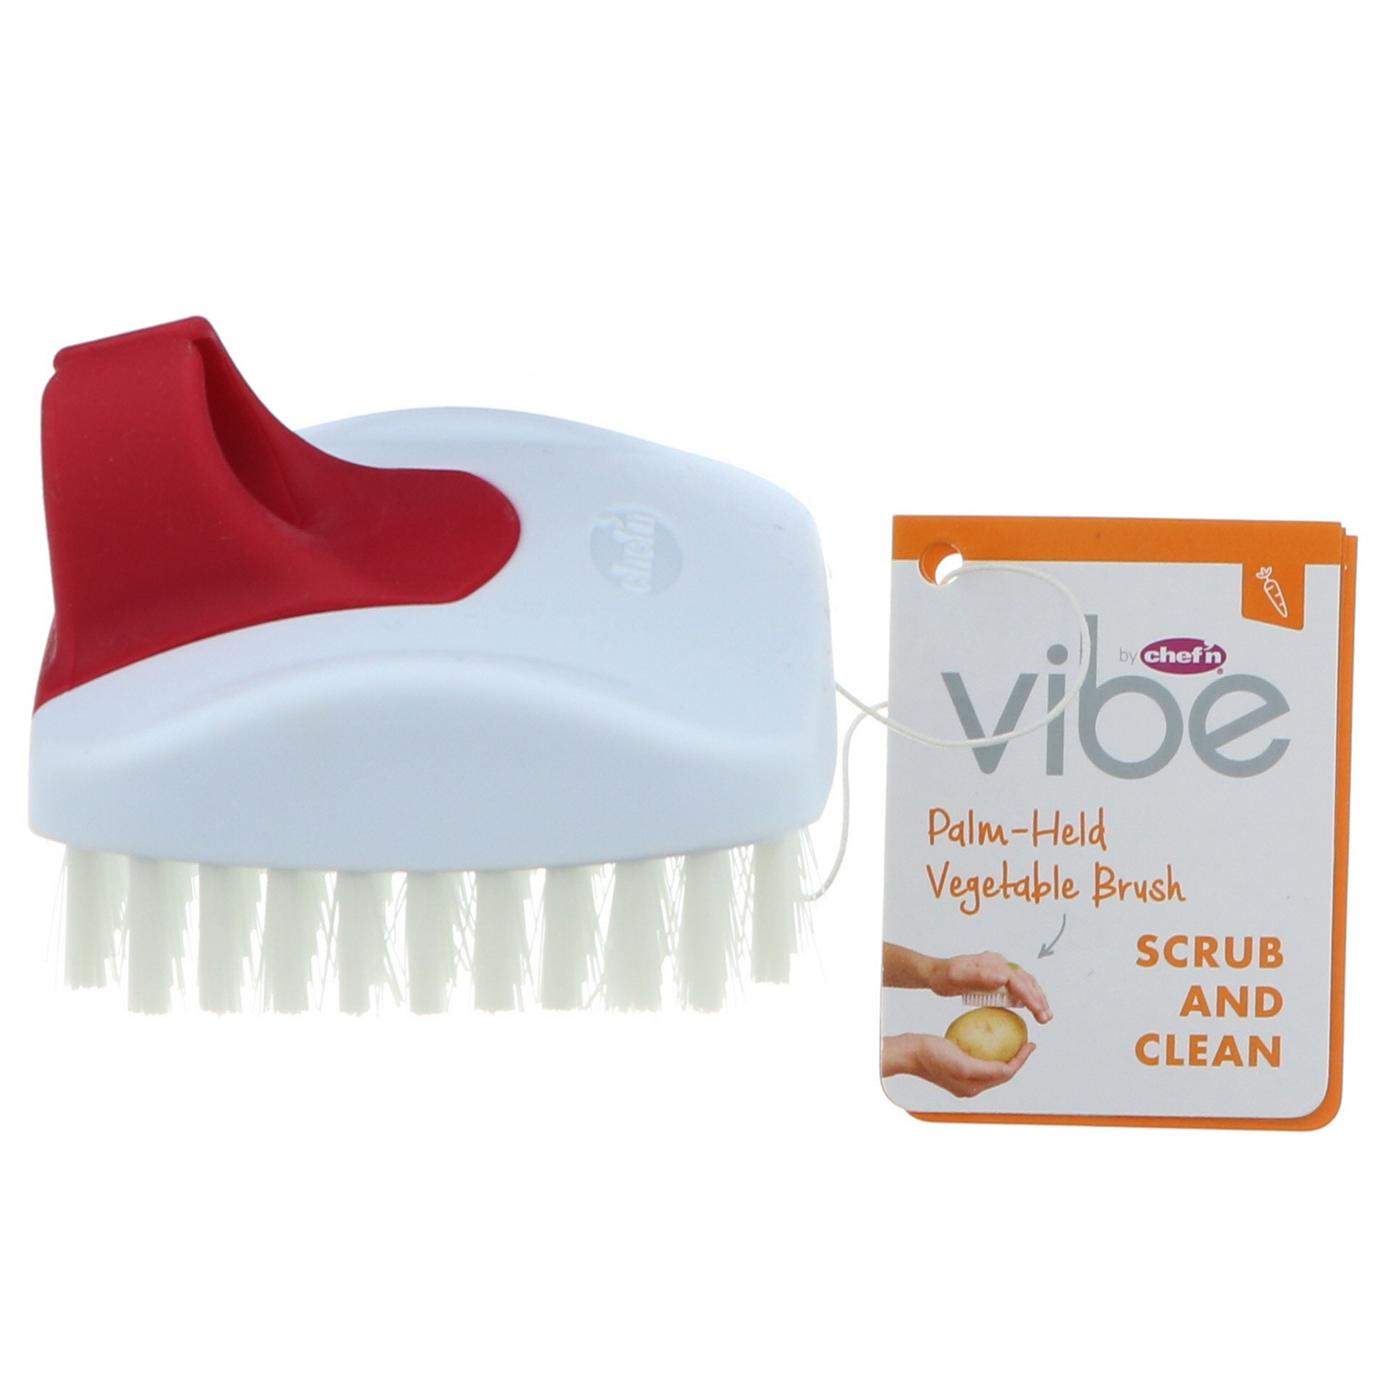 Vibe by Chef'n Palm Vegetable Scrub Brush; image 3 of 3